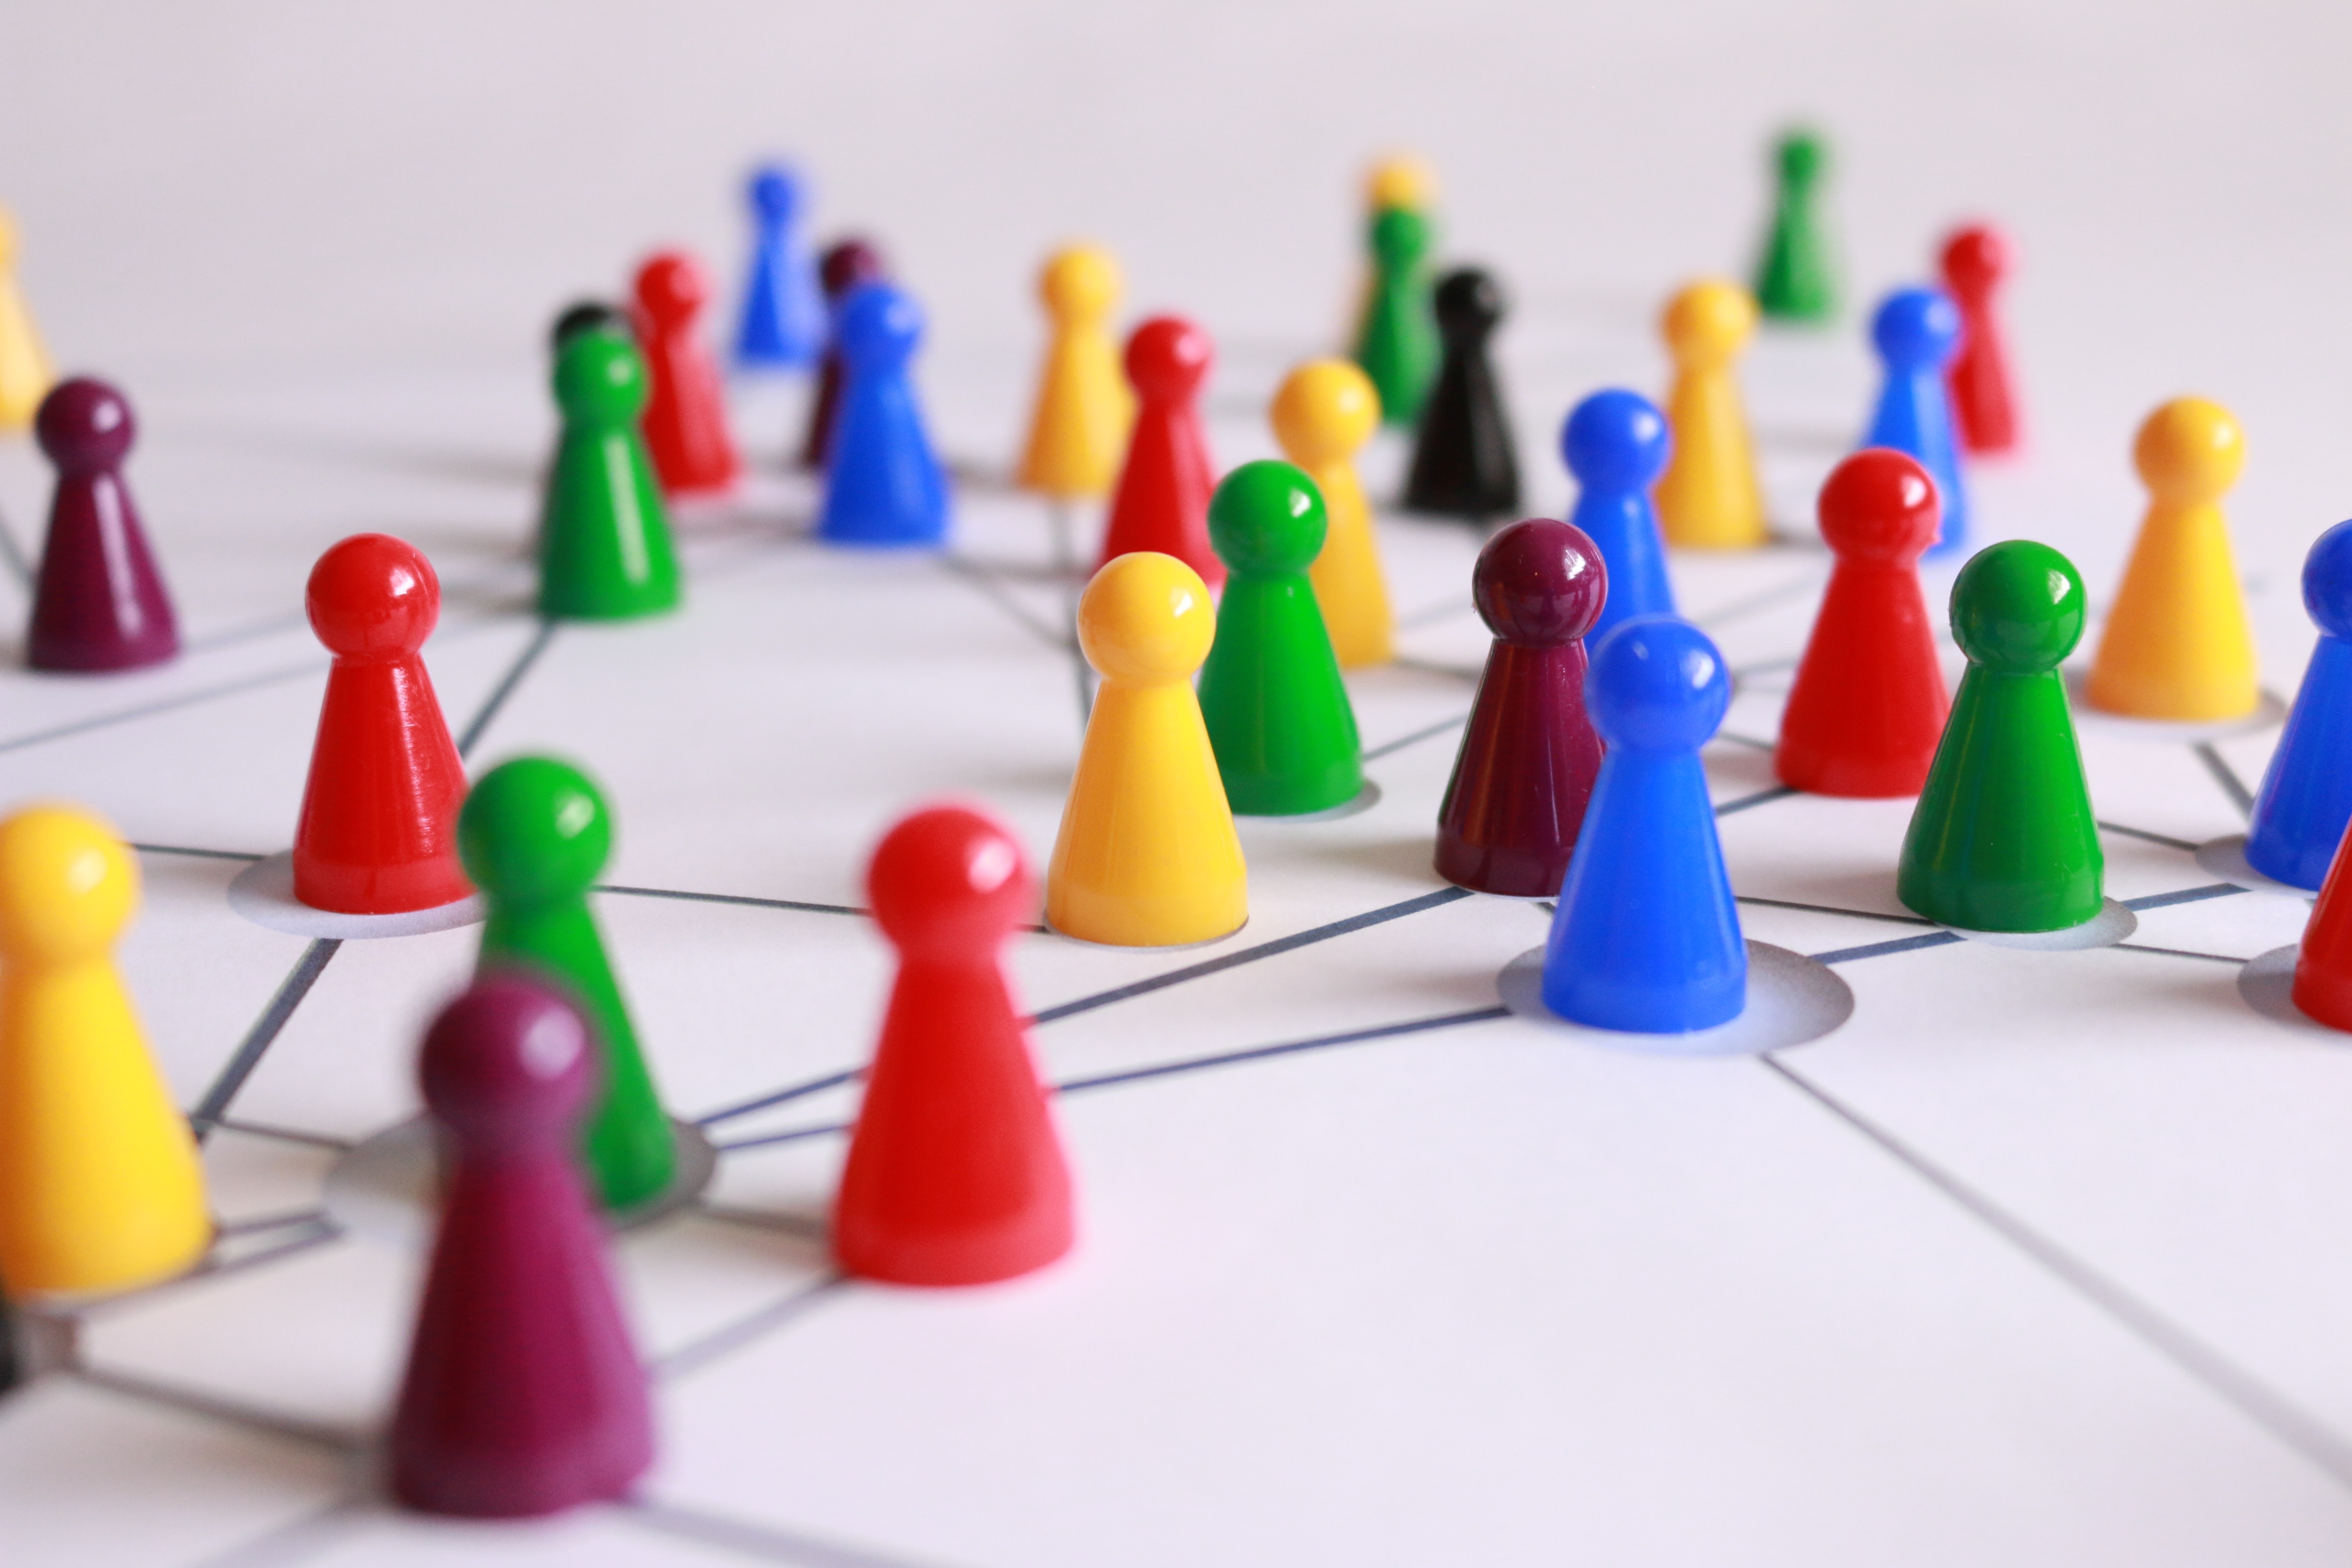 a network-shaped board game